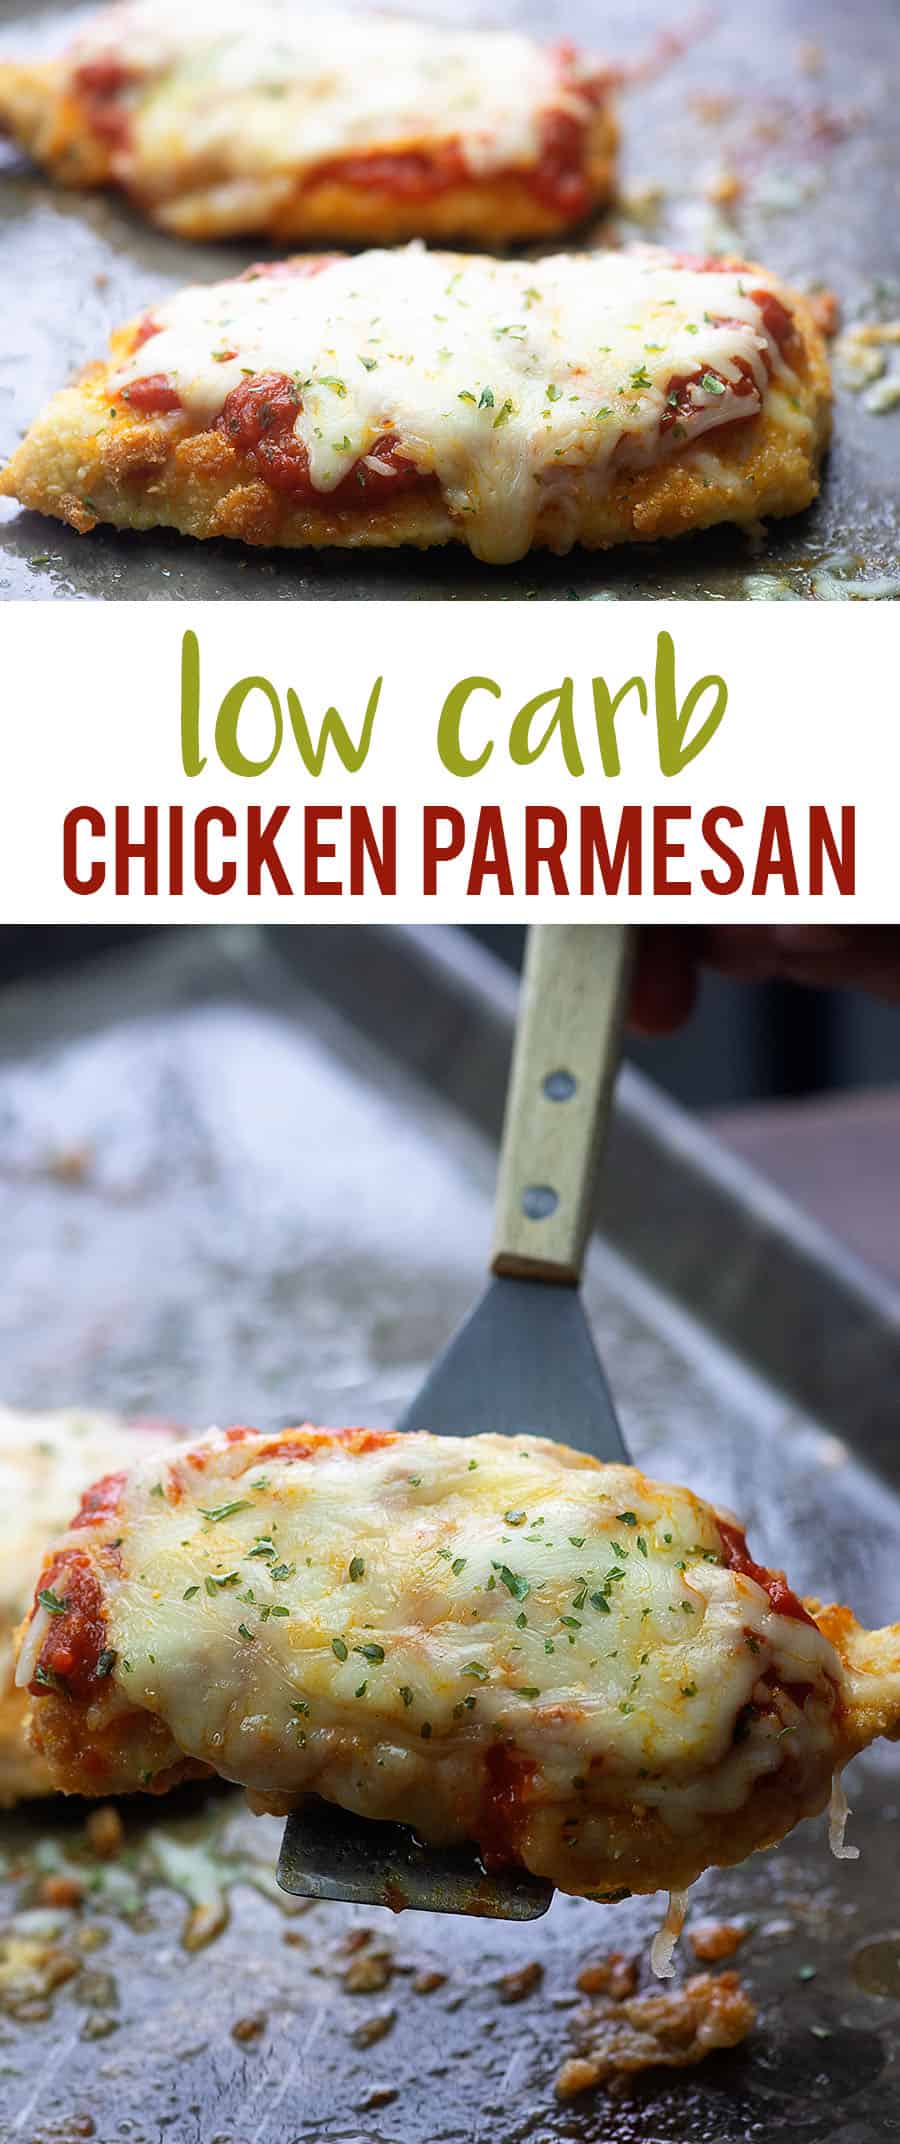 Keto Chicken Parmesan Recipe That Low Carb Life,Dark Green Color Combination Suit